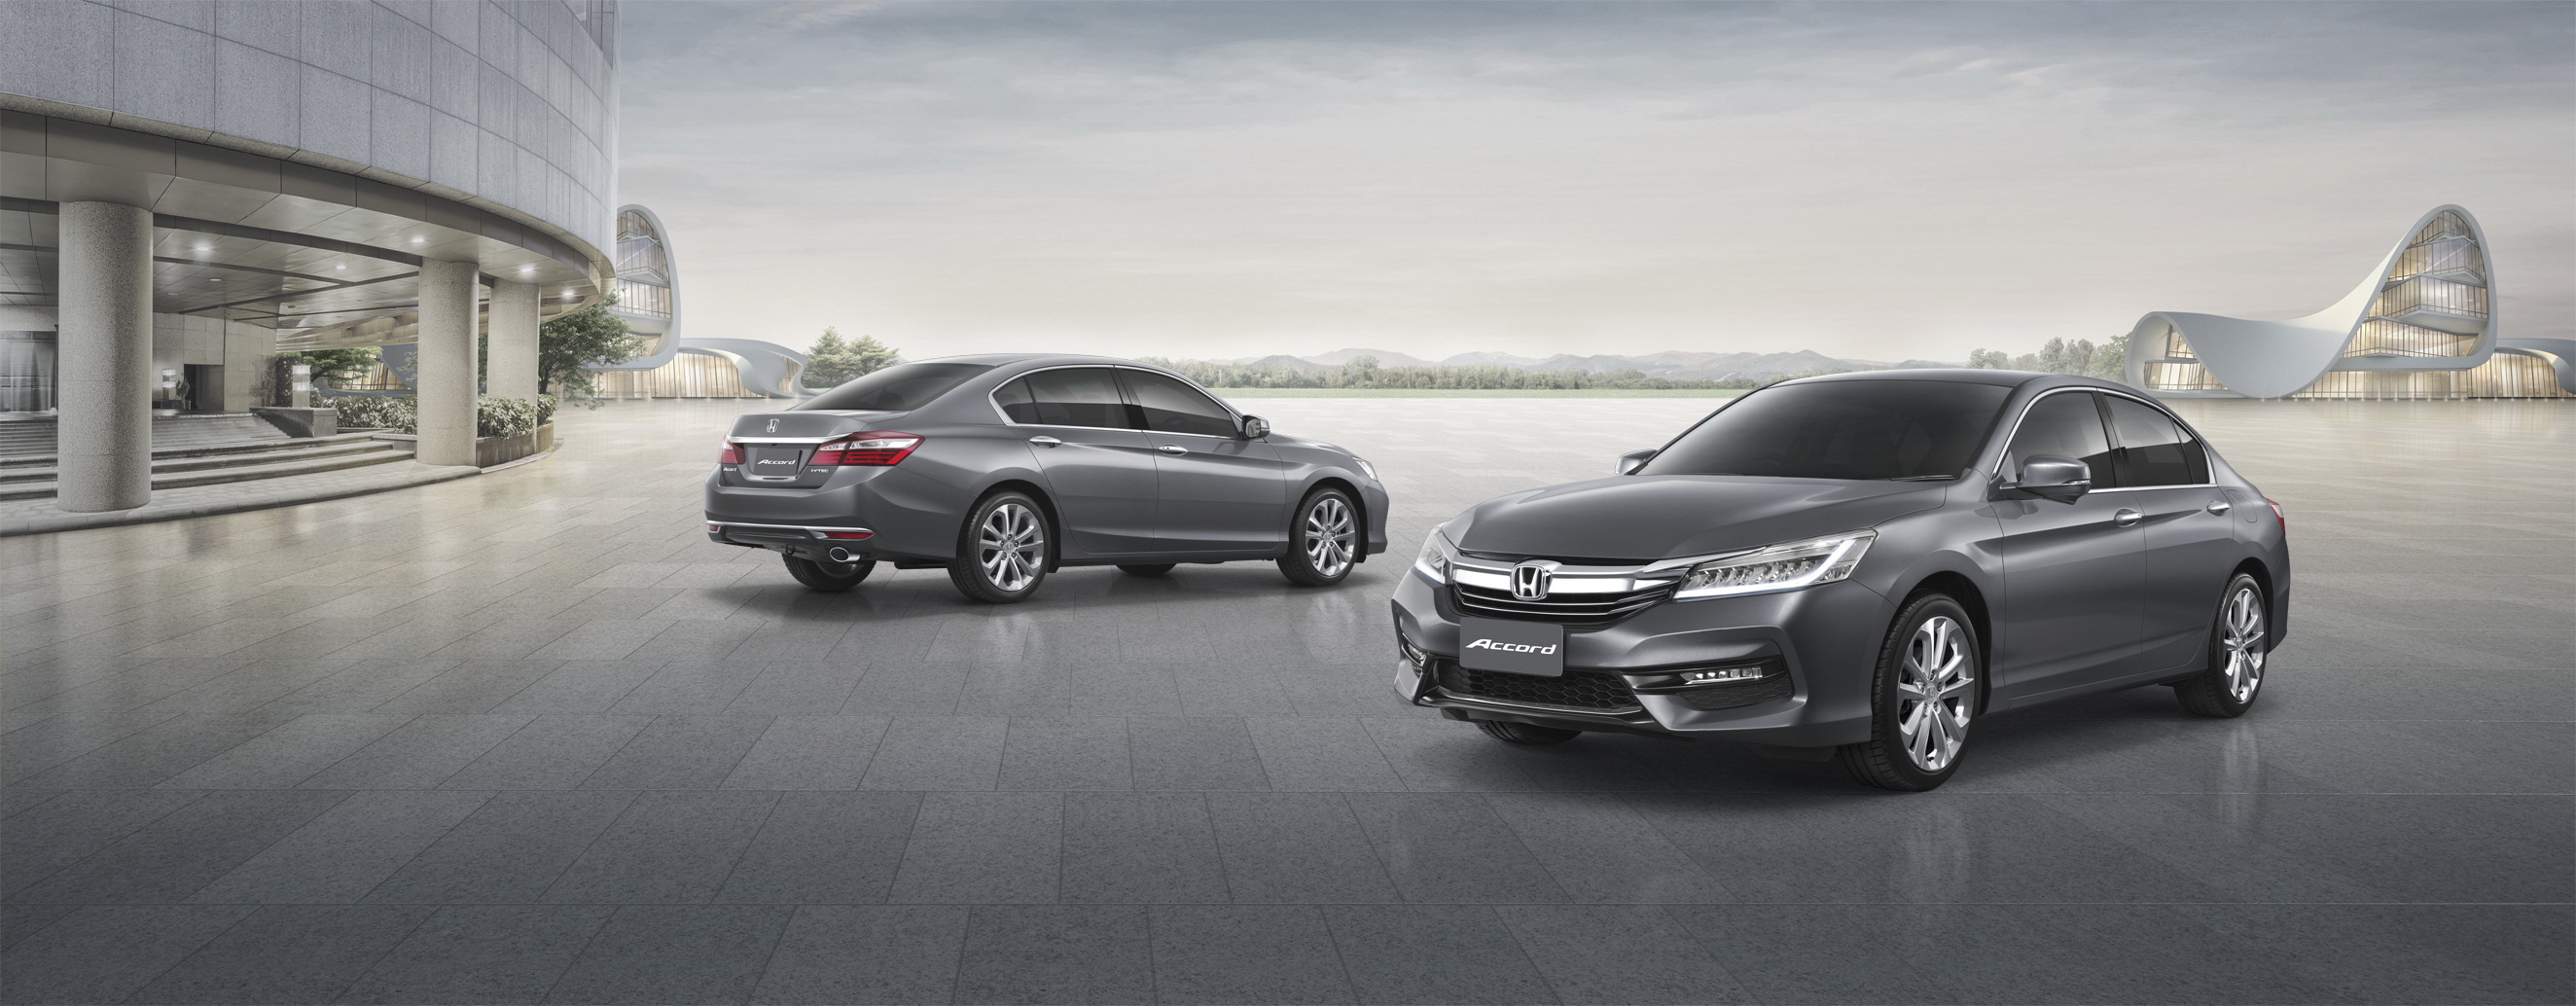 2 New Honda Accord with Background